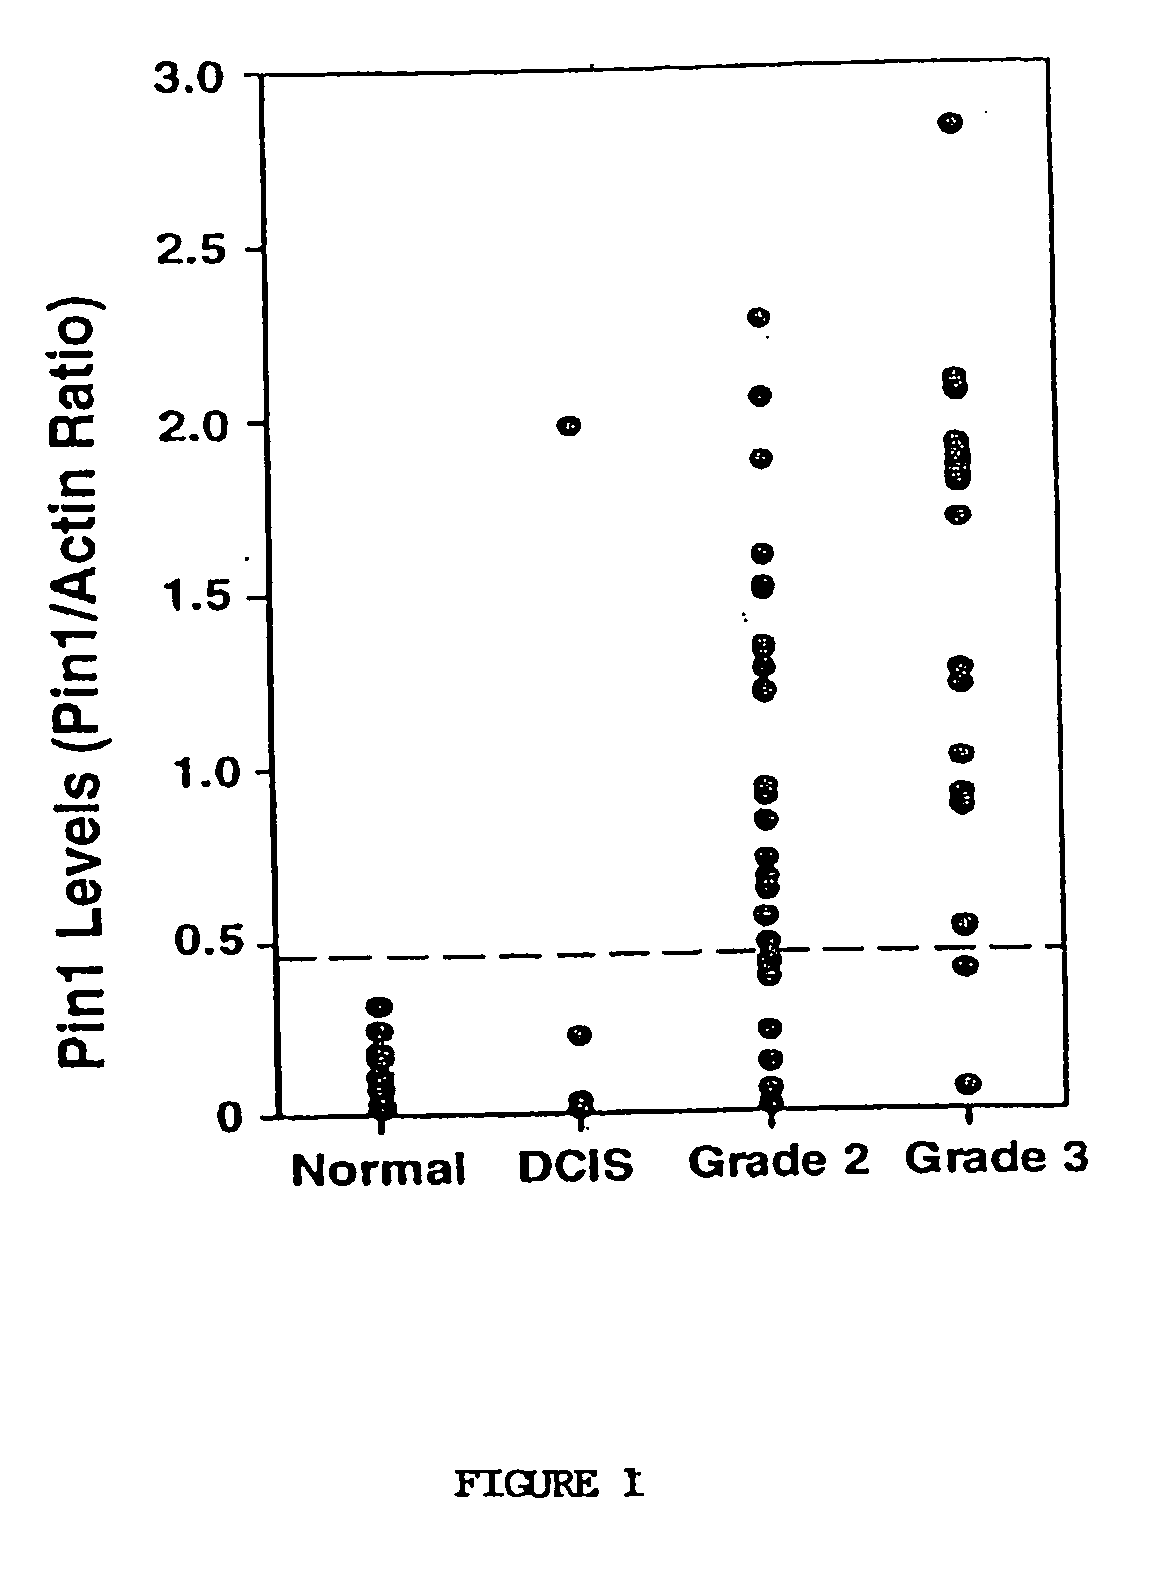 Pin1 as a marker for abnormal cell growth